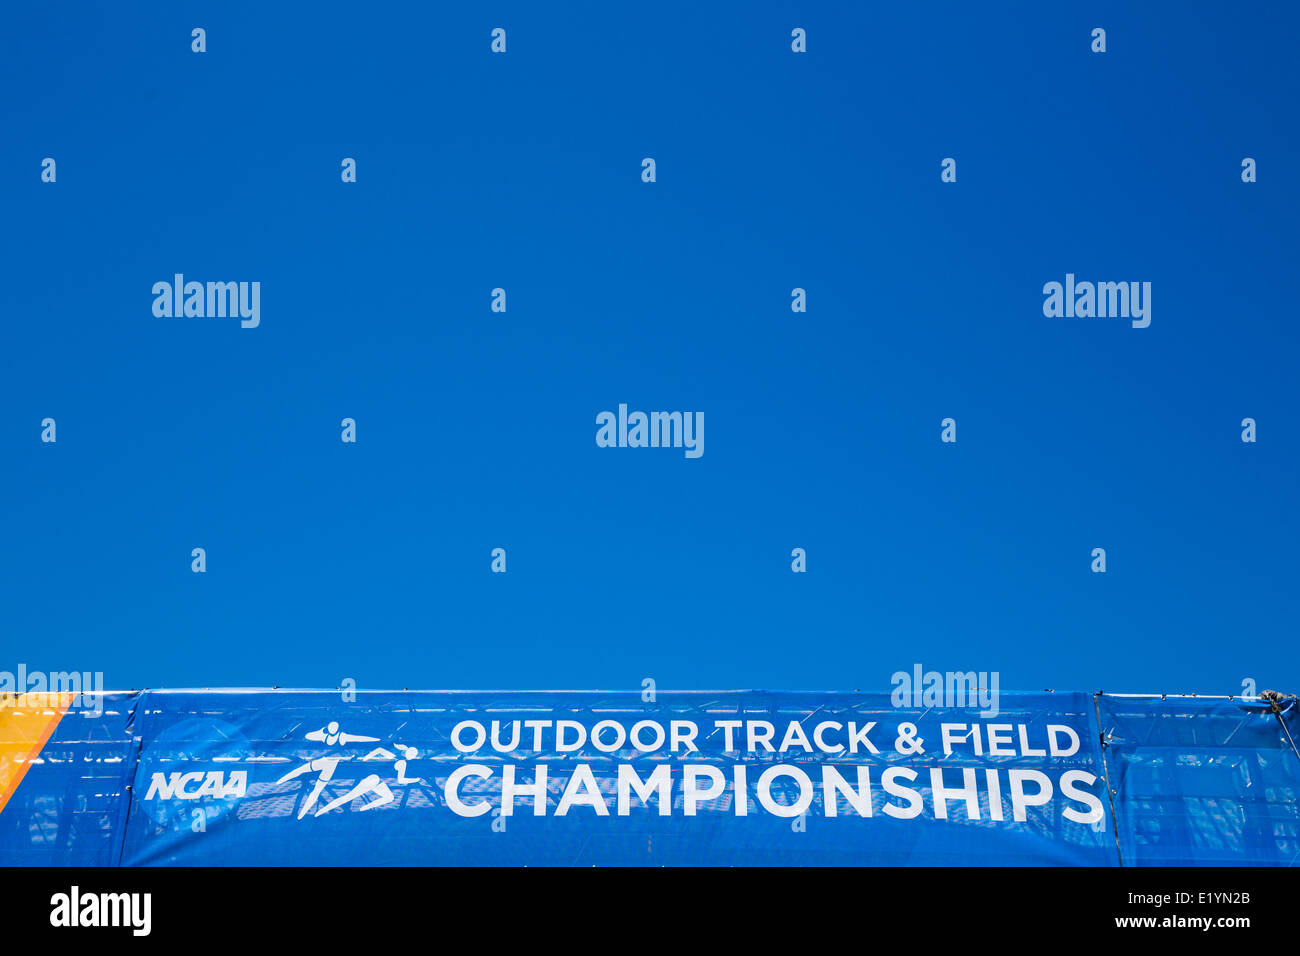 Entrance banner for the 2014 NCAA Outdoor Track and Field Championships located at Hayward Field on the University of Oregon. Stock Photo